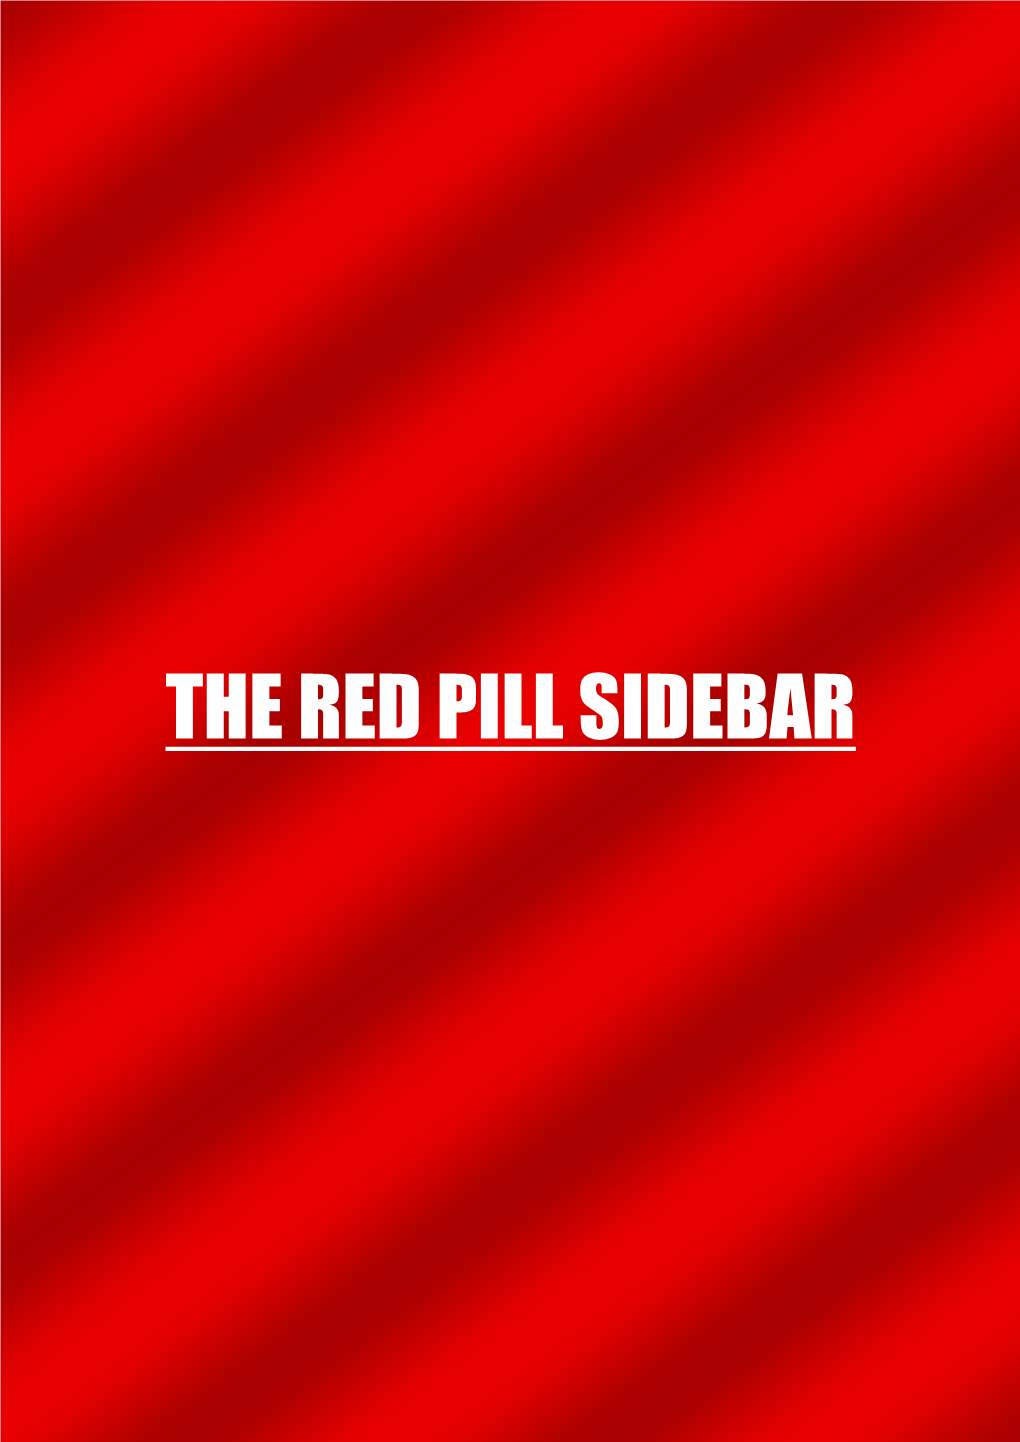 Download the Red Pill Sidebar.Pdf